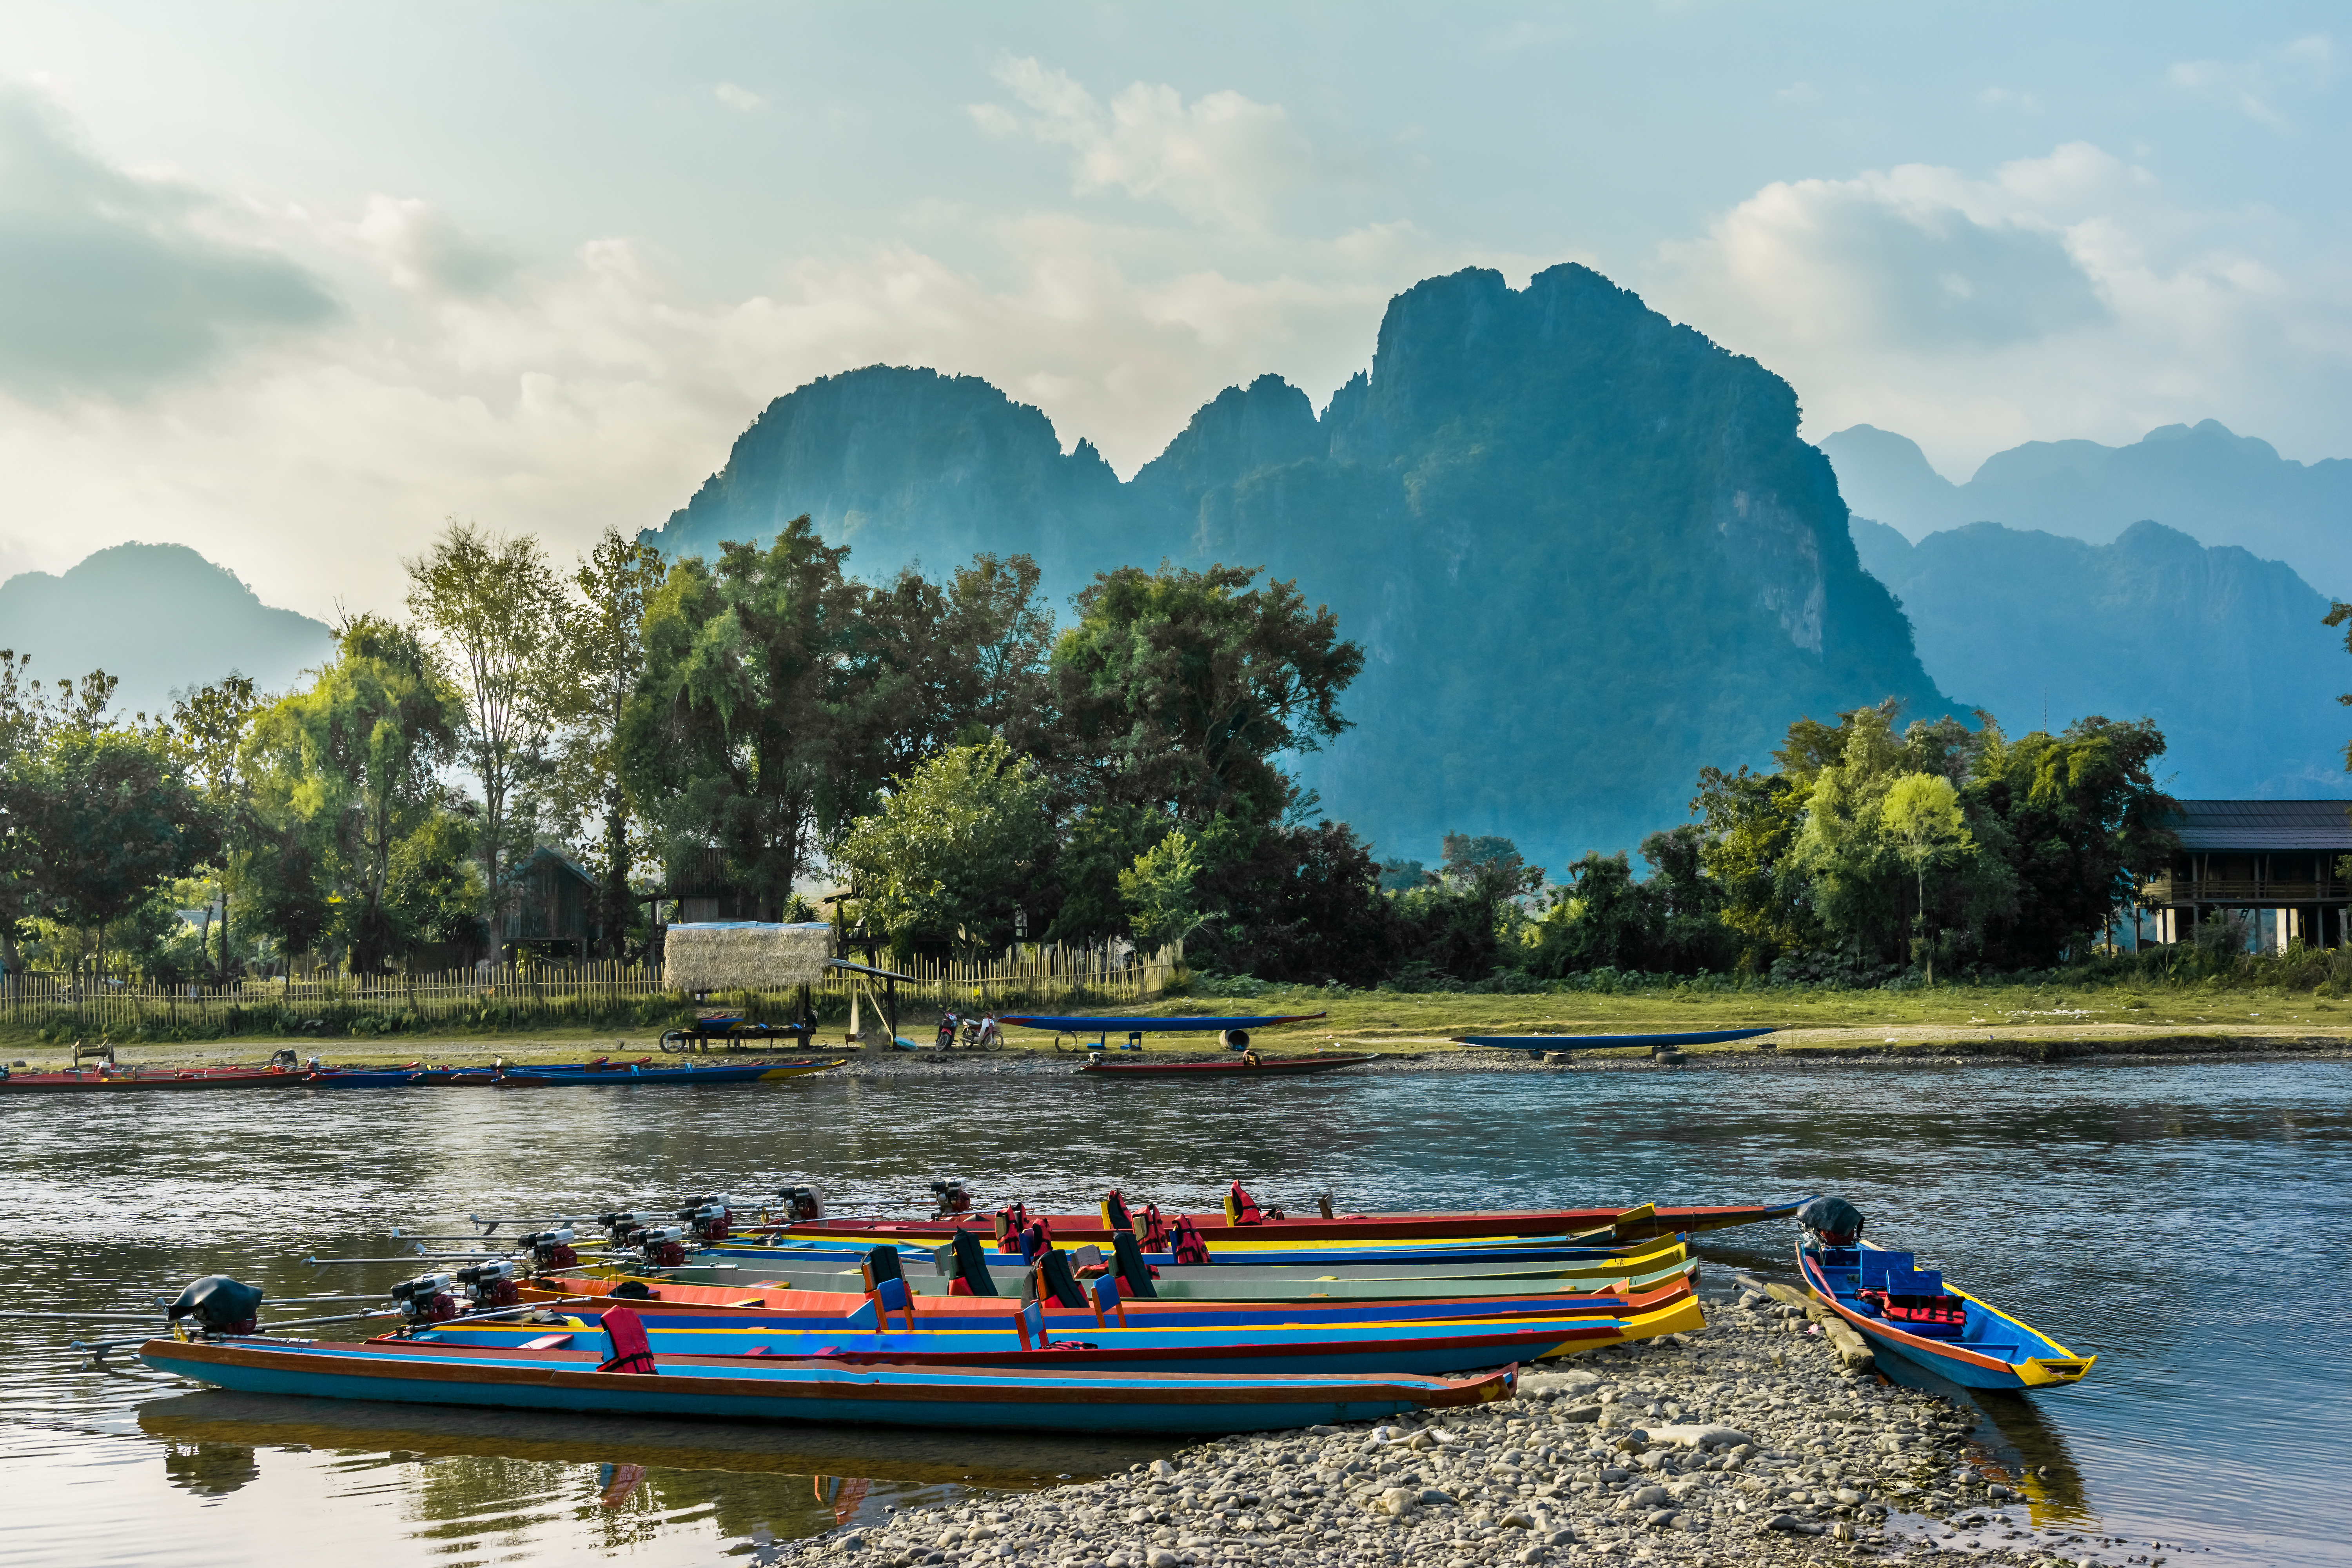 Laos, one of the cheapest countries to live in